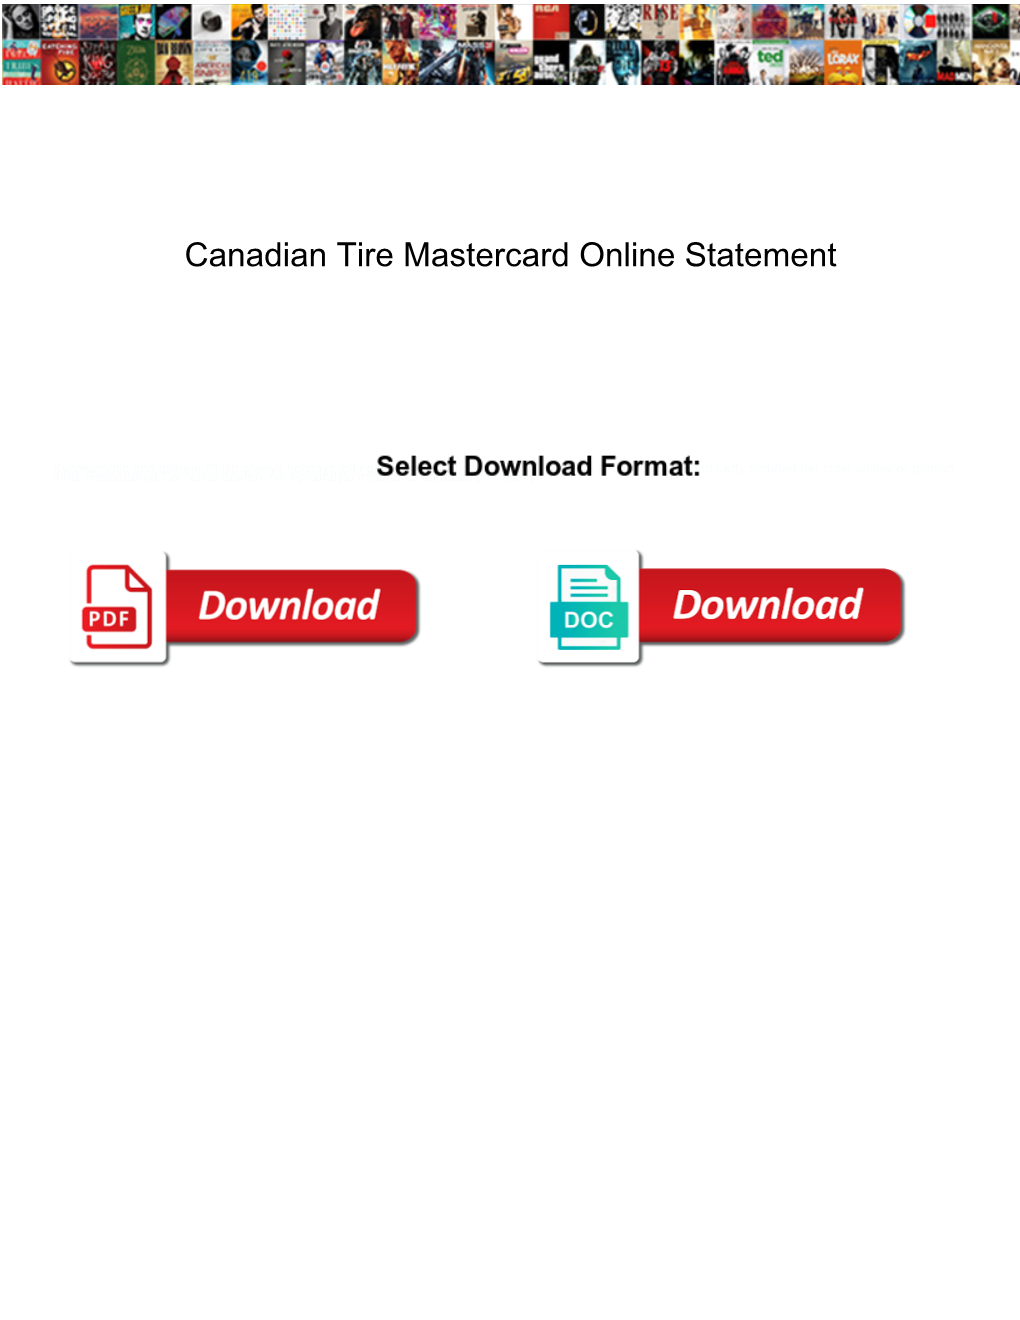 Canadian Tire Mastercard Online Statement